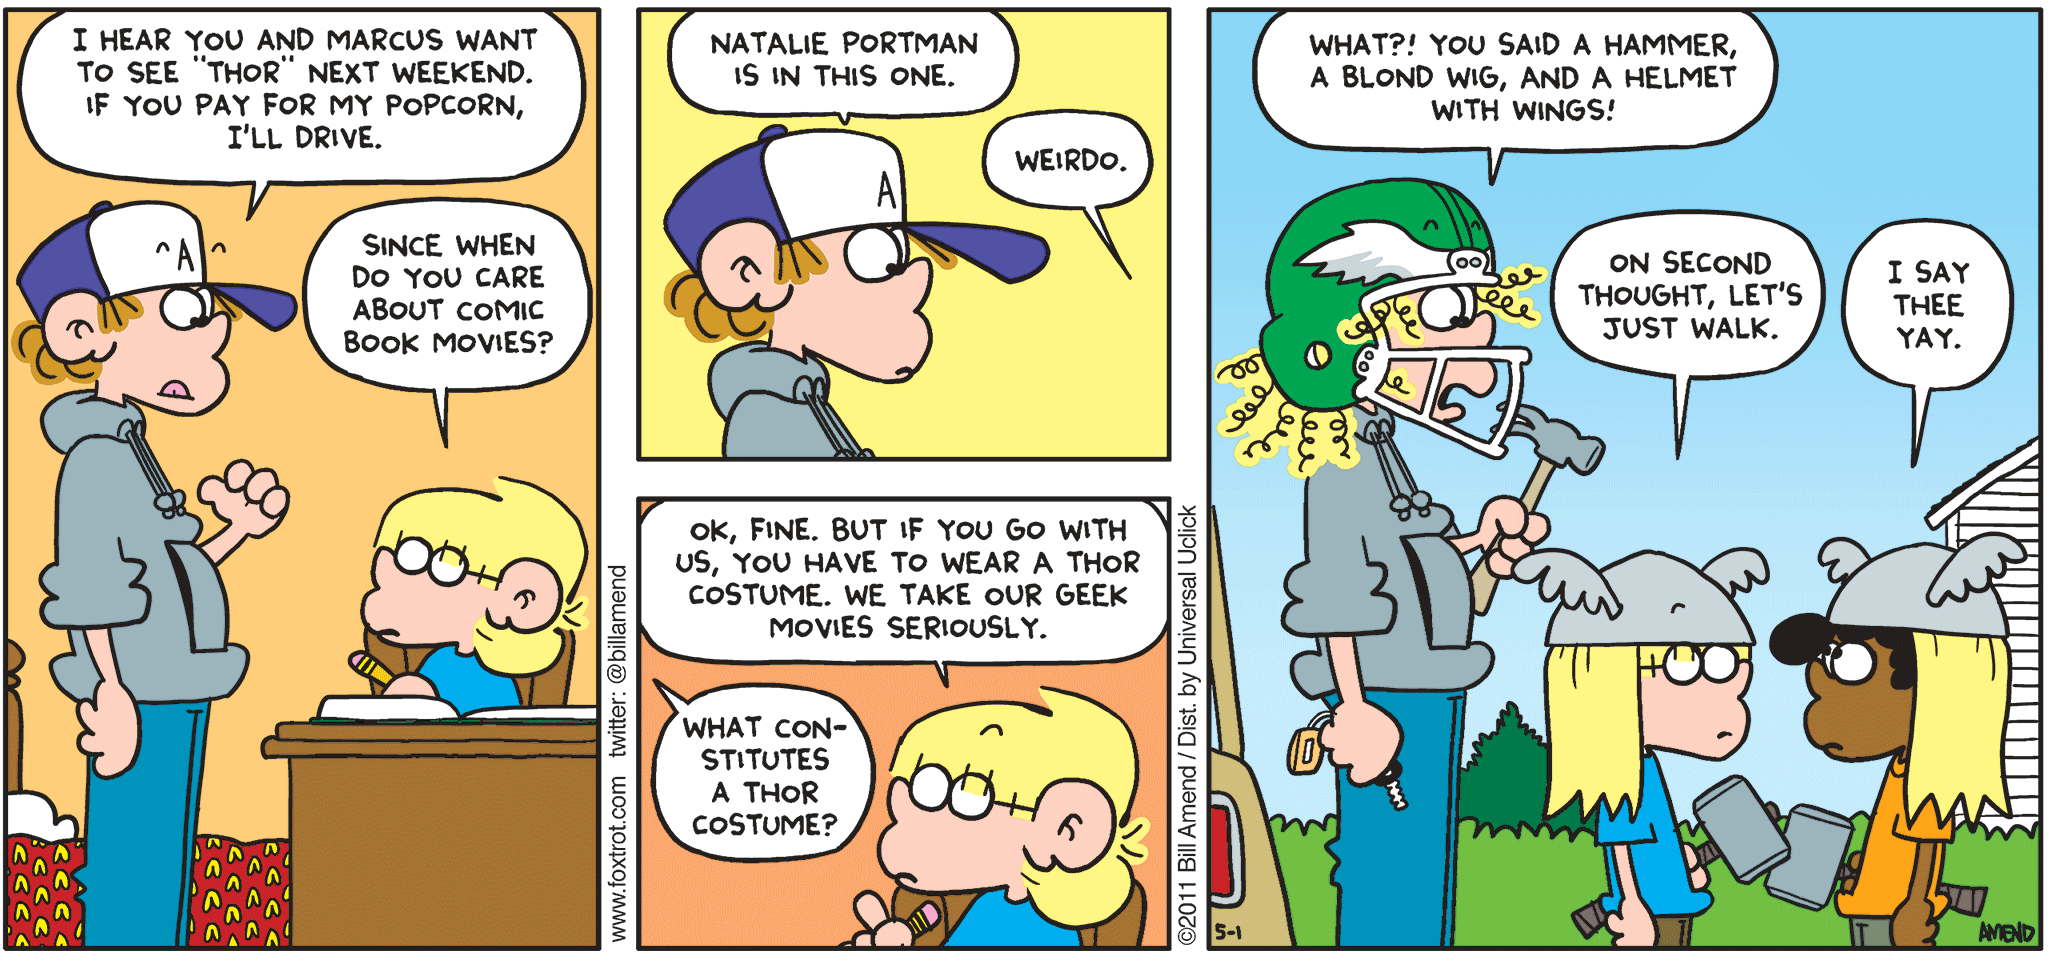 FoxTrot comic strip by Bill Amend - "Tho Thorry" published May 1, 2011 - Peter: I hear you and Marcus want to see "Thor" next weekend. If you pay for my popcorn, I'll drive. Jason: Since when do you care about comic book movies? Peter: Natalie Portman is in this one. Jason: Weirdo. Ok, fine. But if you go with us, you have to wear a Thor costume. We take our geek movies seriously. Peter: What constitutes a Thor costume? Peter: What?! You said a hammer, a blond wig, and a helmet with wings! Jason: On second thought, let's just walk. Marcus: I say thee yay.